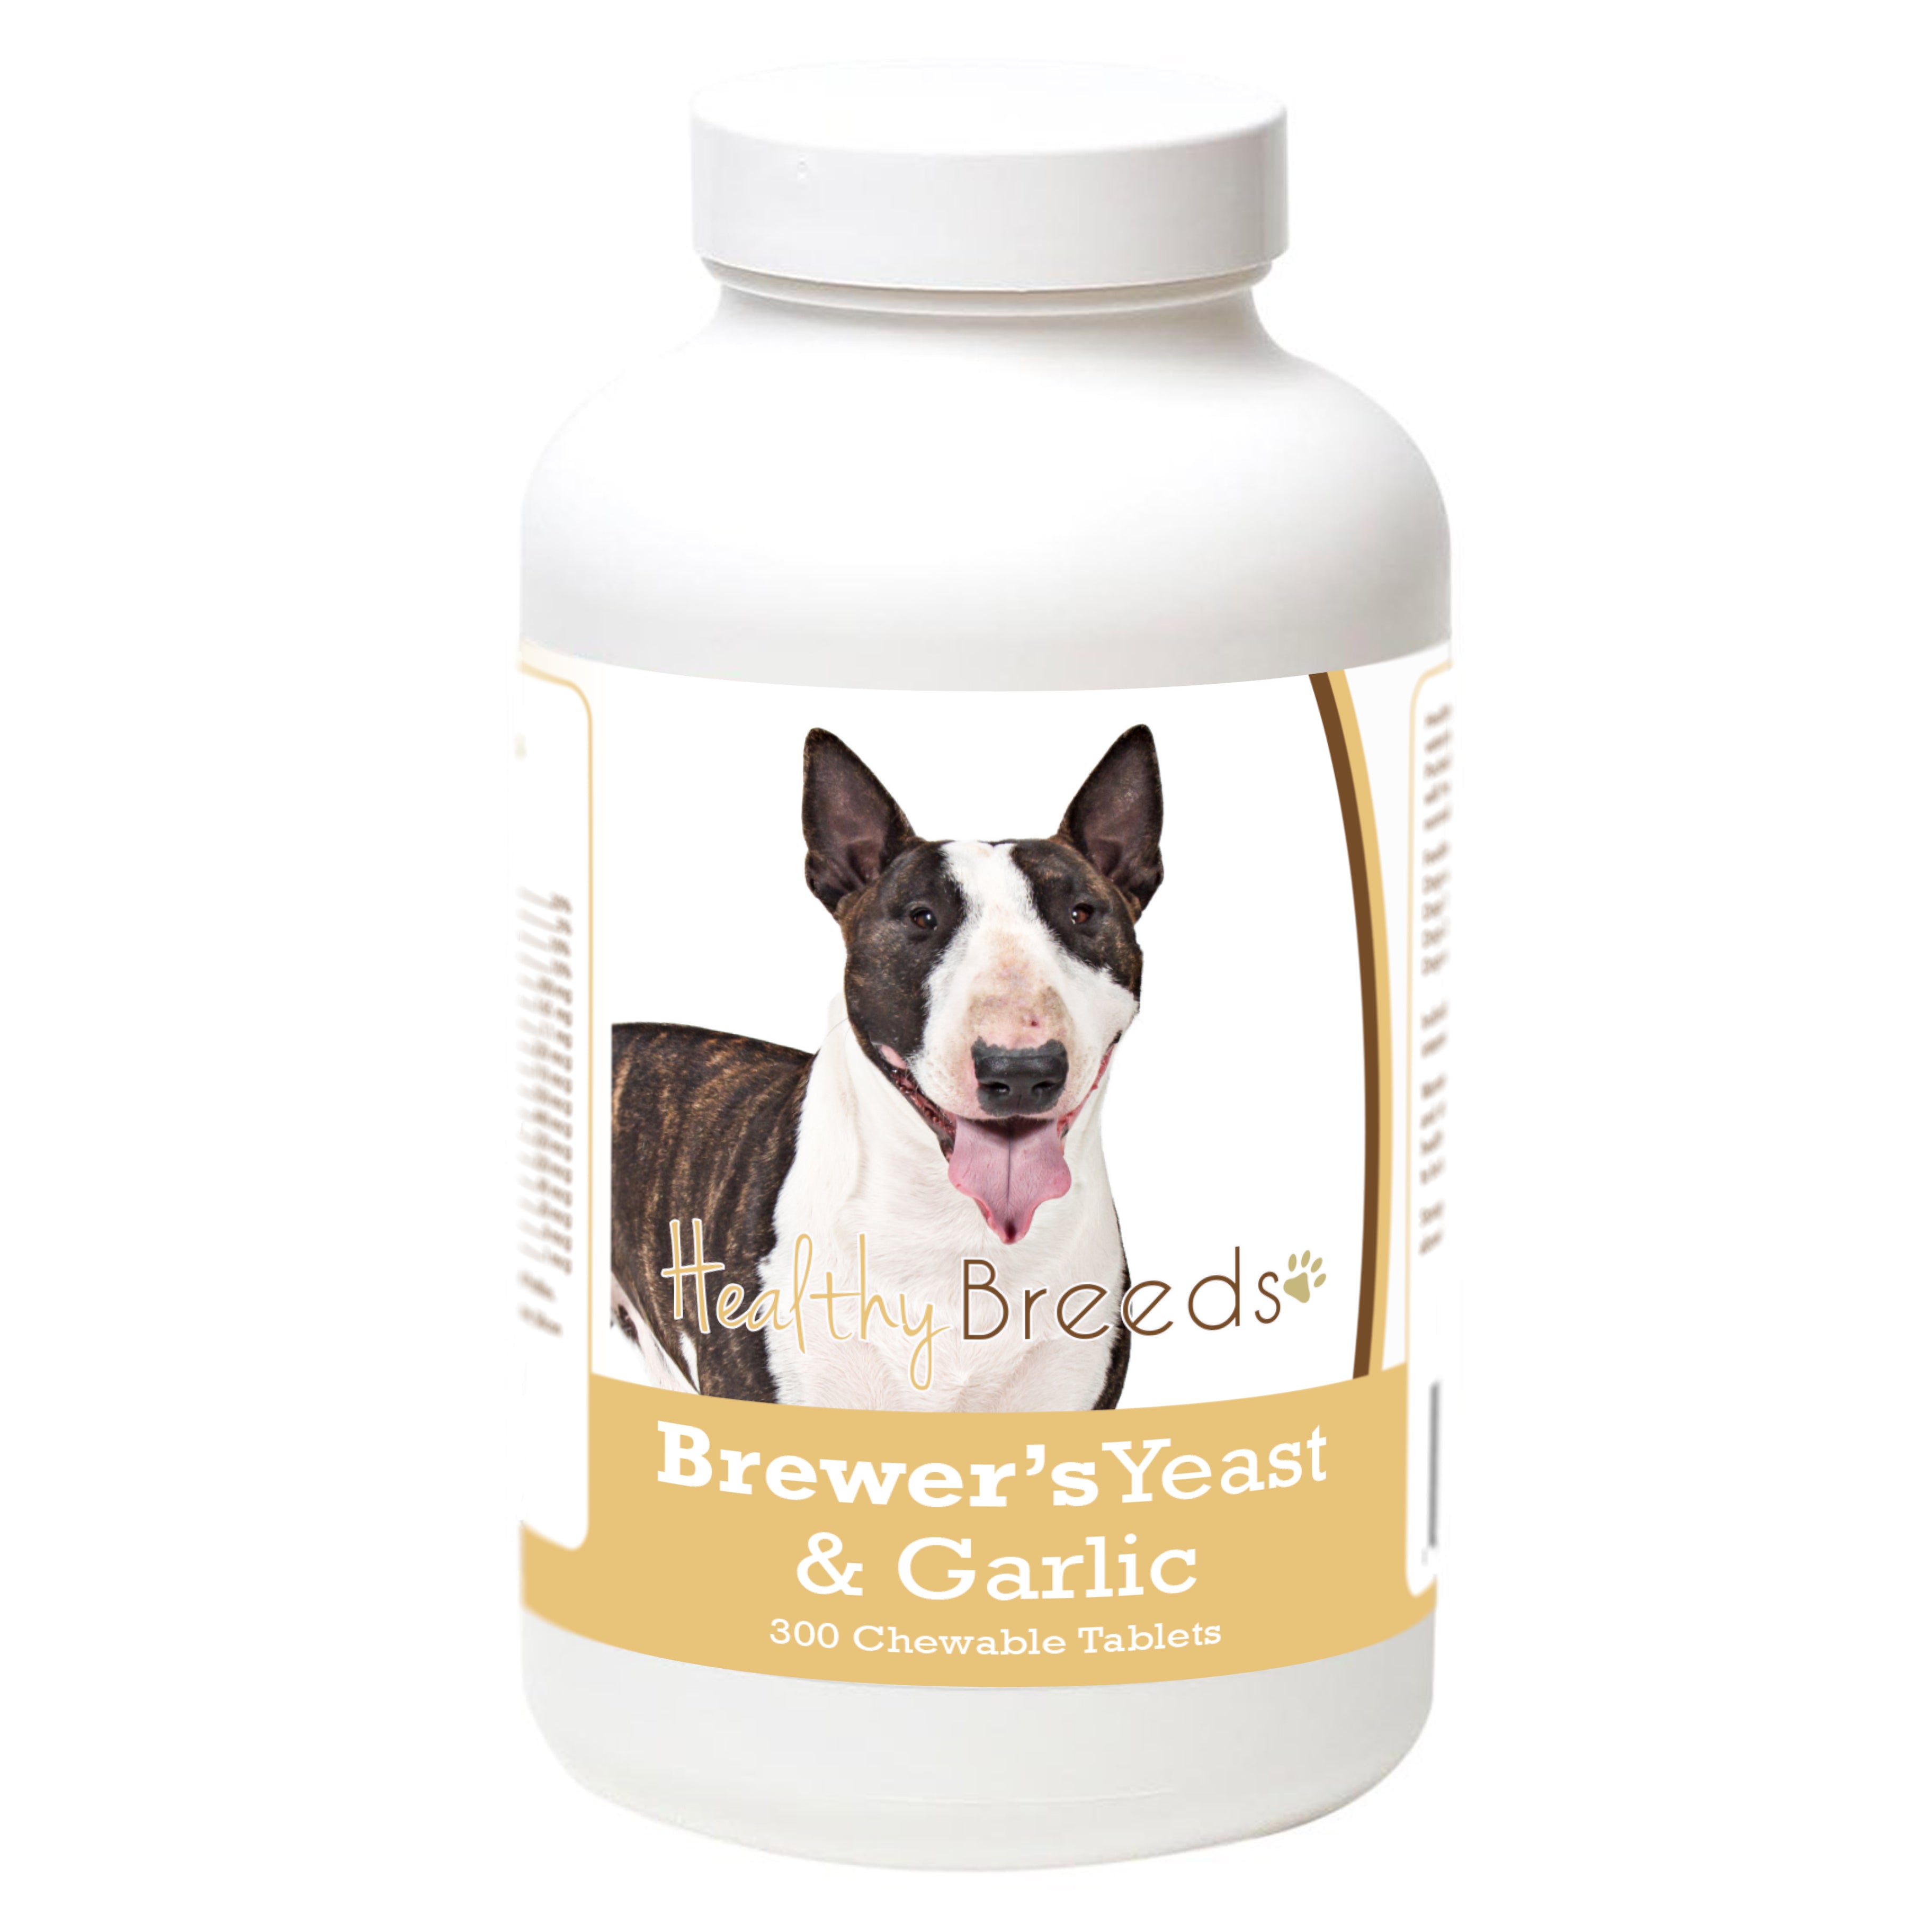 Miniature Bull Terrier Brewers Yeast Tablets 300 Count